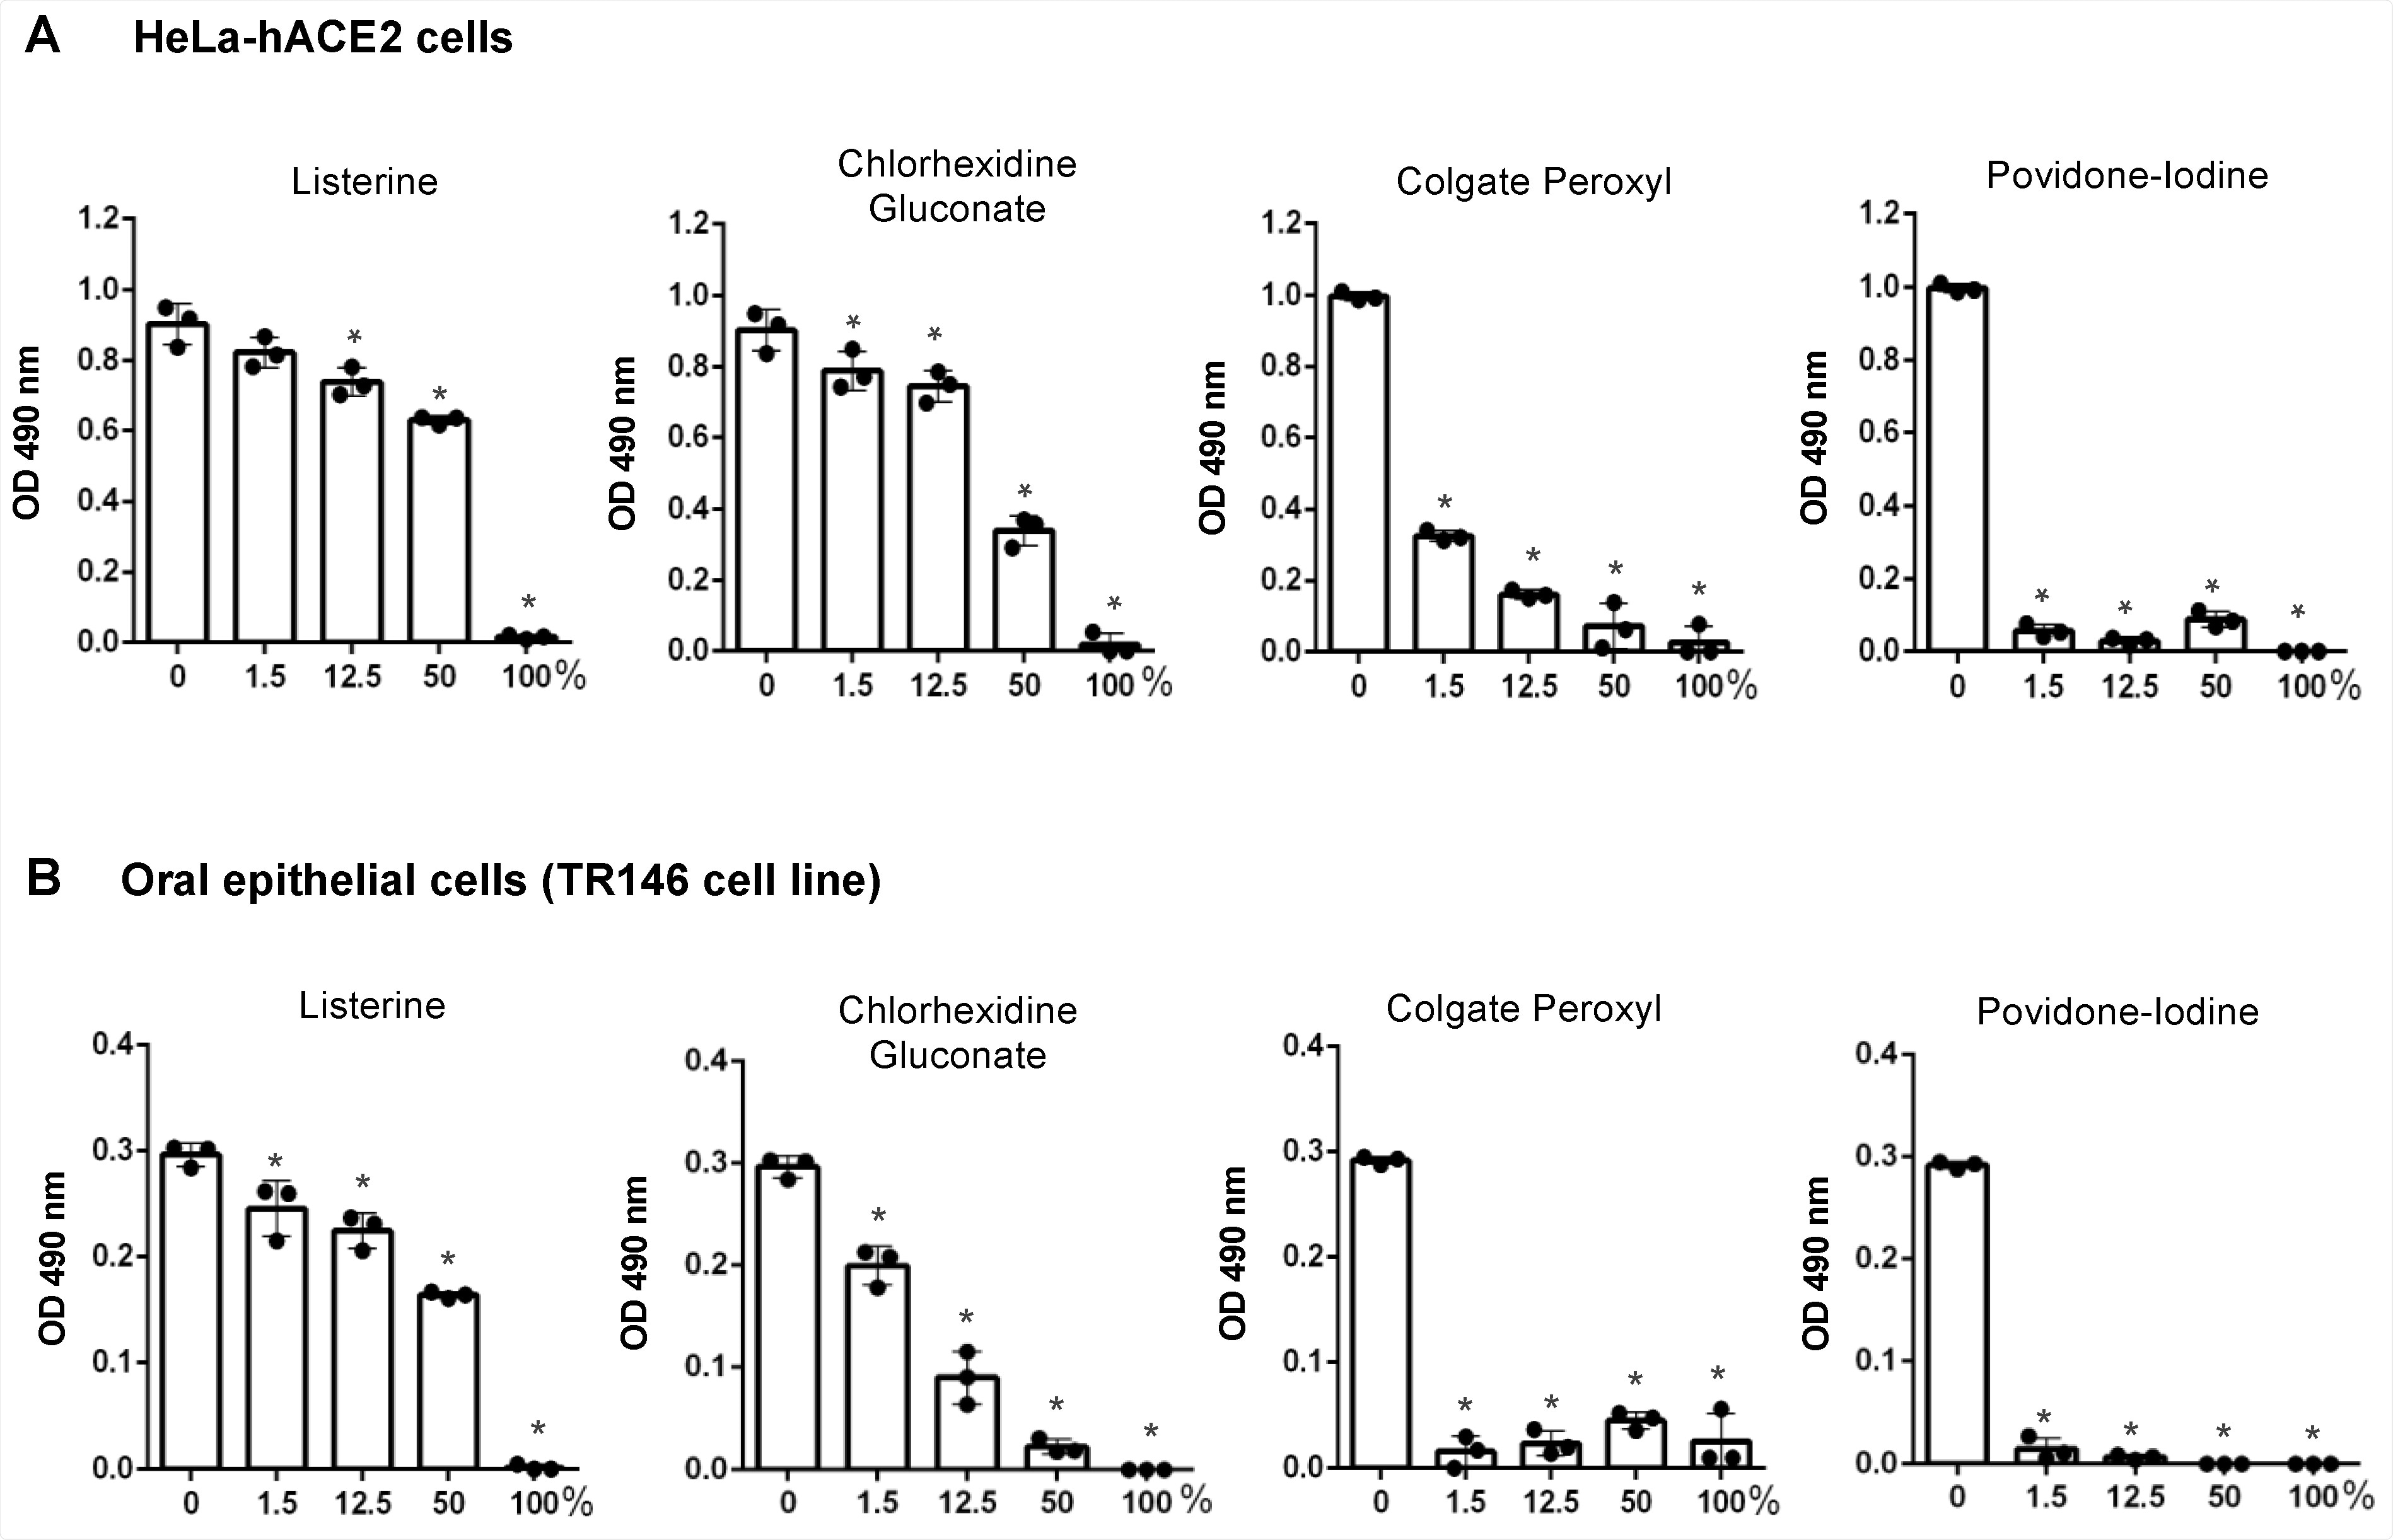 The effect of short-term exposure to mouth rinses on the viability of HeLa-hACE2 and oral epithelial cells. Human angiotensin-converting enzyme 2 (hACE2)-expressing HeLa cells (A) and oral epithelial TR146 cells (B) were treated for 20 s with different dilutions (v/v) of products including Listerine, chlorhexidine gluconate (CHG), Colgate Peroxyl, or povidone-iodine. Cells were washed and cultured with fresh medium immediately. Cell viability was determined by the 3-(4,5-dimethylthiazol-2-yl)-5-(3-carboxymethoxyphenyl)-2-(4-sulfophenyl)-2H-tetrazolium, inner salt (MTS)-based CellTiter 96 AQueous One Solution Cell Proliferation Assay. Data are means ±SD of three samples. The significance of differences between mouth rinse-treated cells and mocked-treated controls was compared; * p < 0.05.